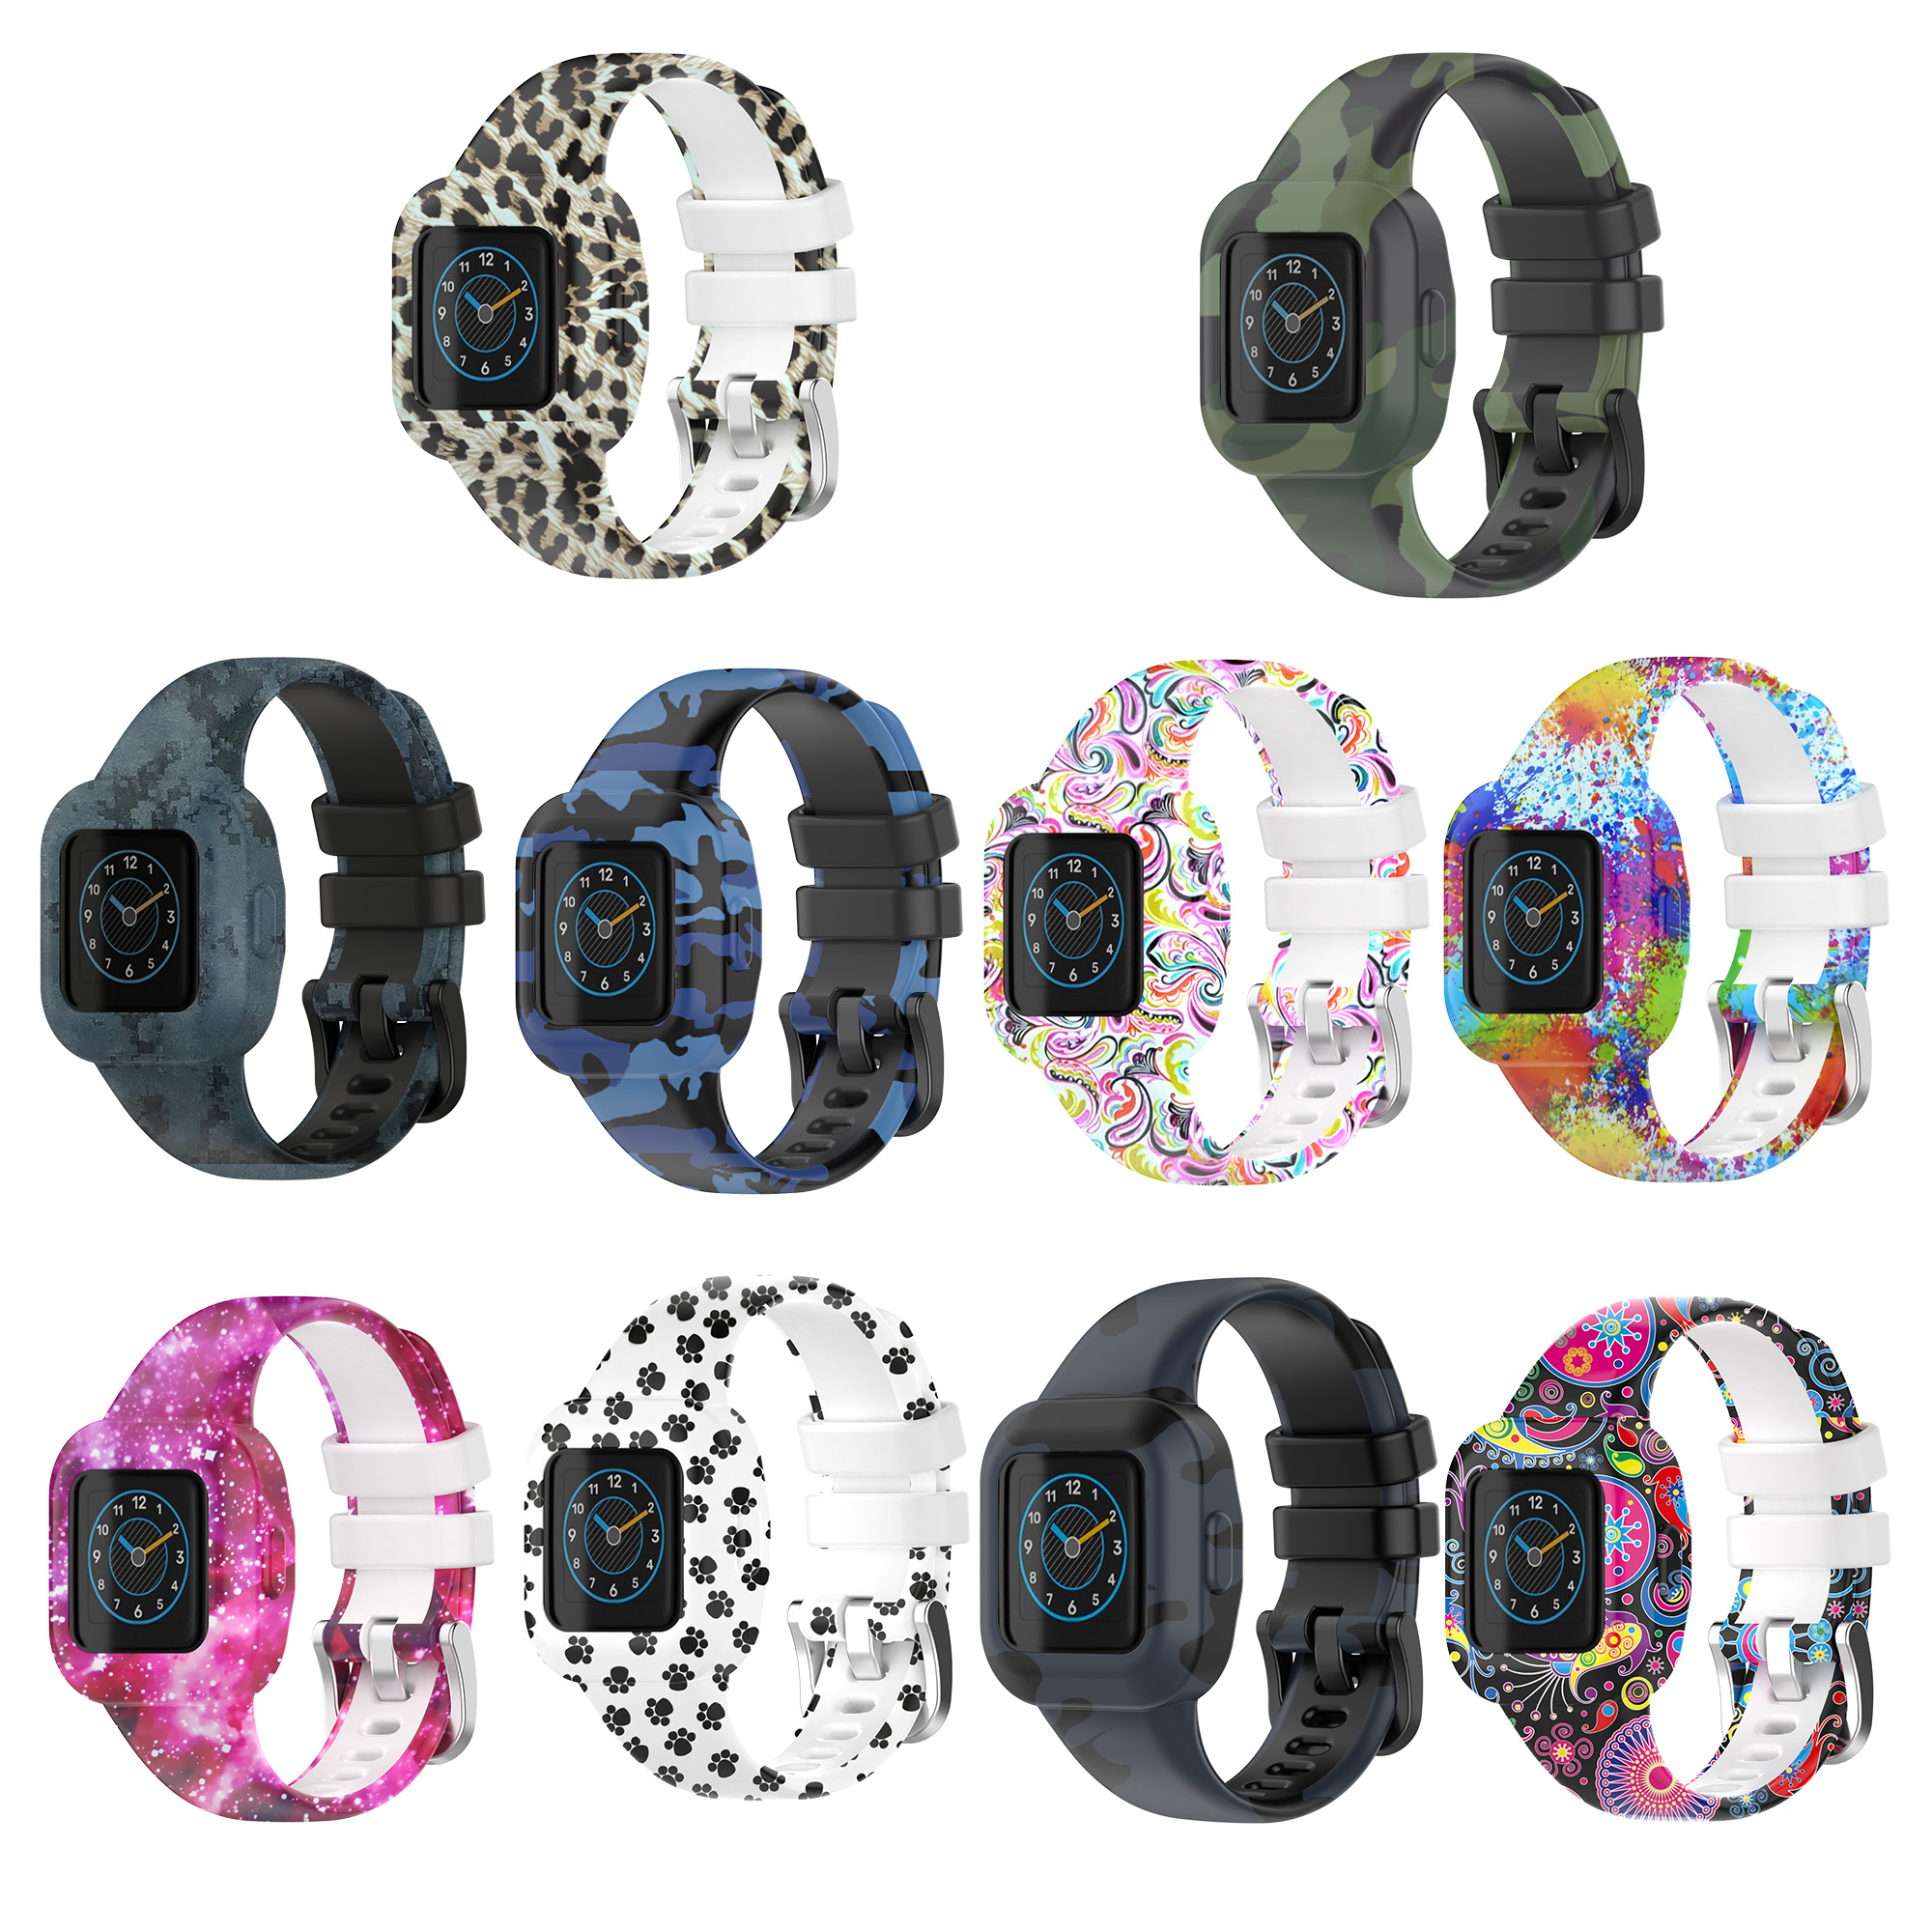 Bakeey-Colorful-Half-pack-Silicone-Kids-Replacement-Strap-Smart-Watch-Band-For-Garmin-Fit-JR3Vivofit-1806538-1